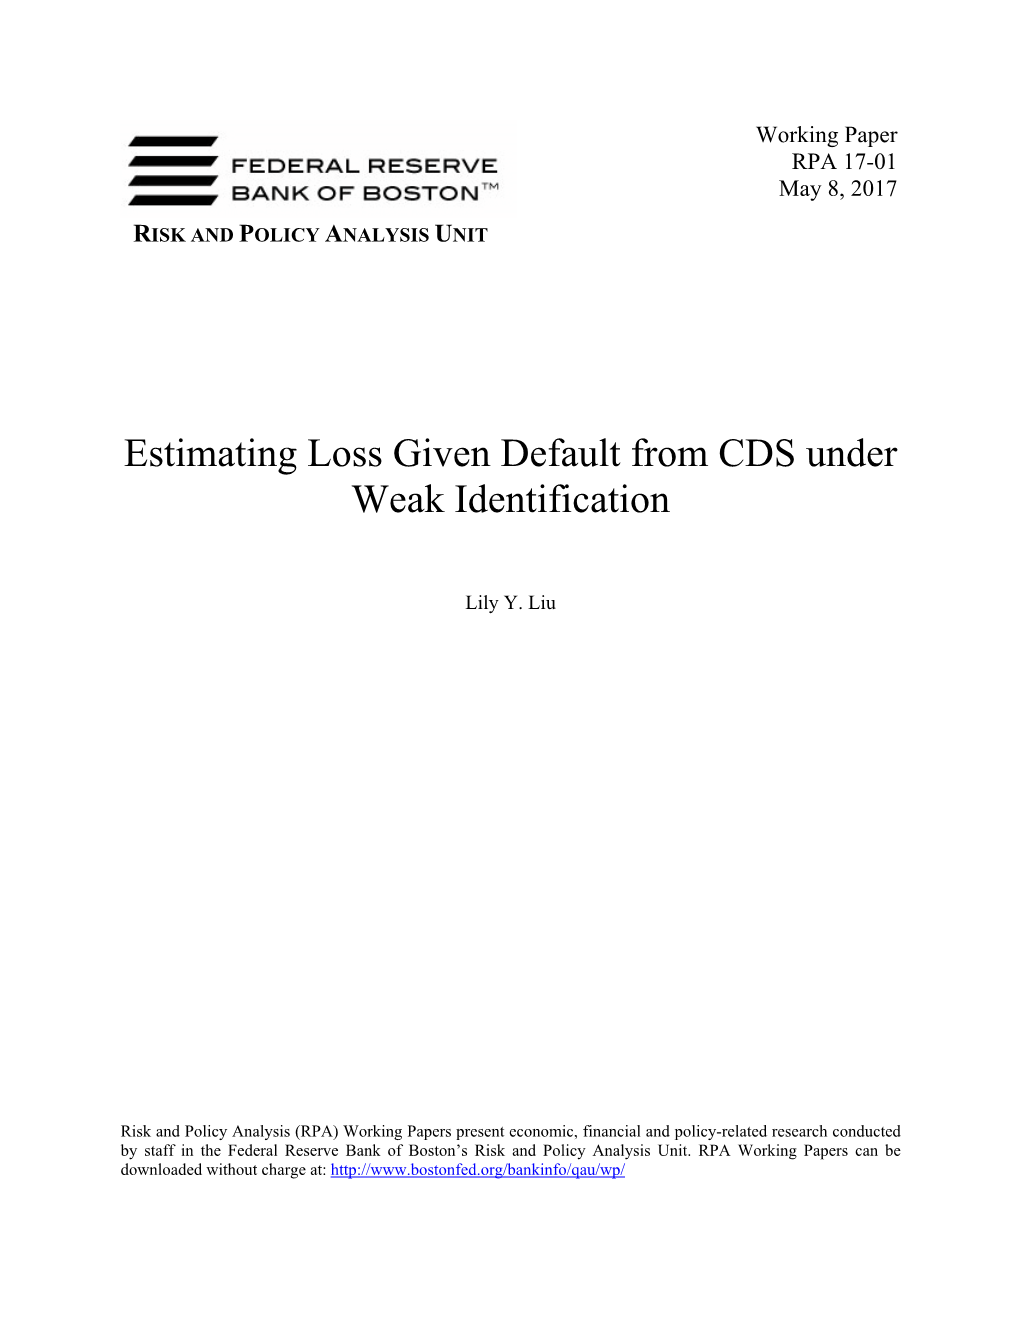 Estimating Loss Given Default from CDS Under Weak Identification